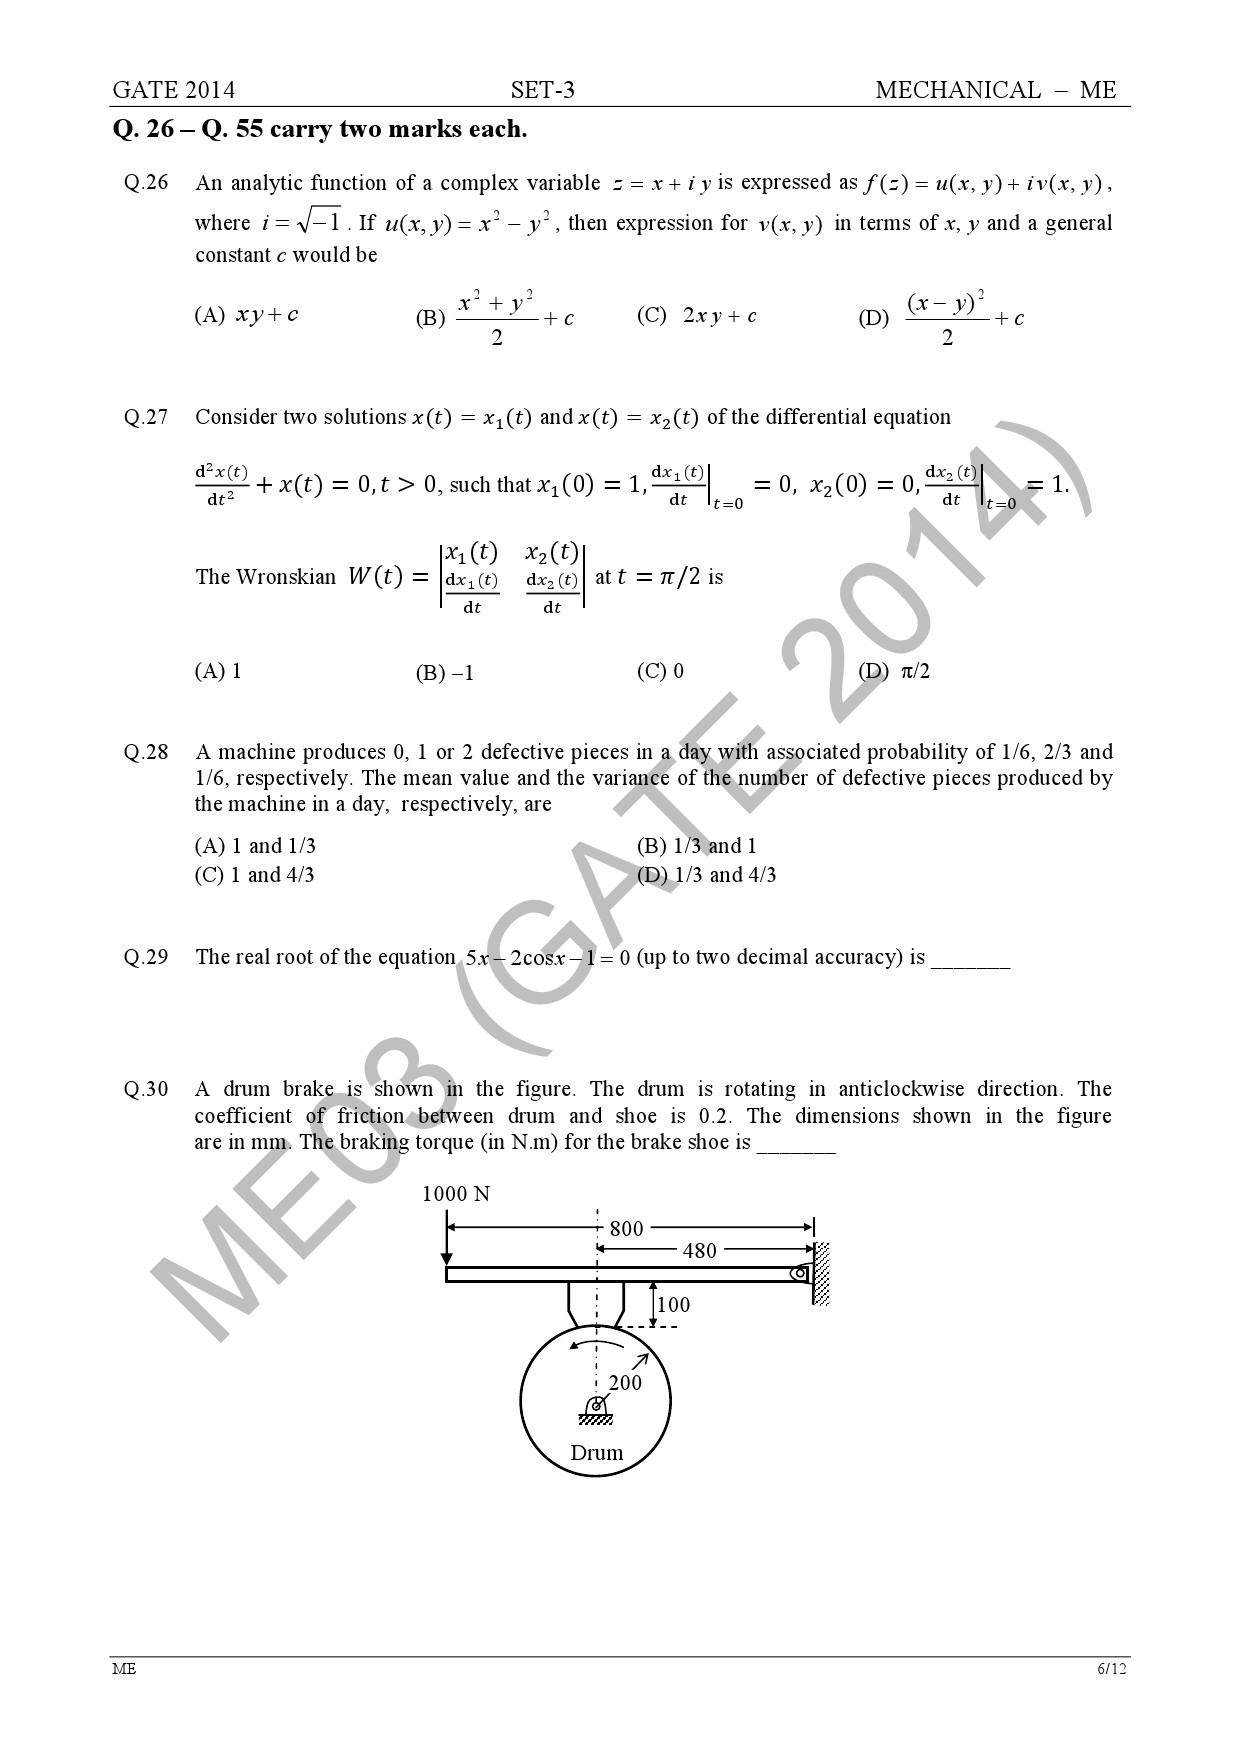 GATE Exam Question Paper 2014 Mechanical Engineering Set 3 13